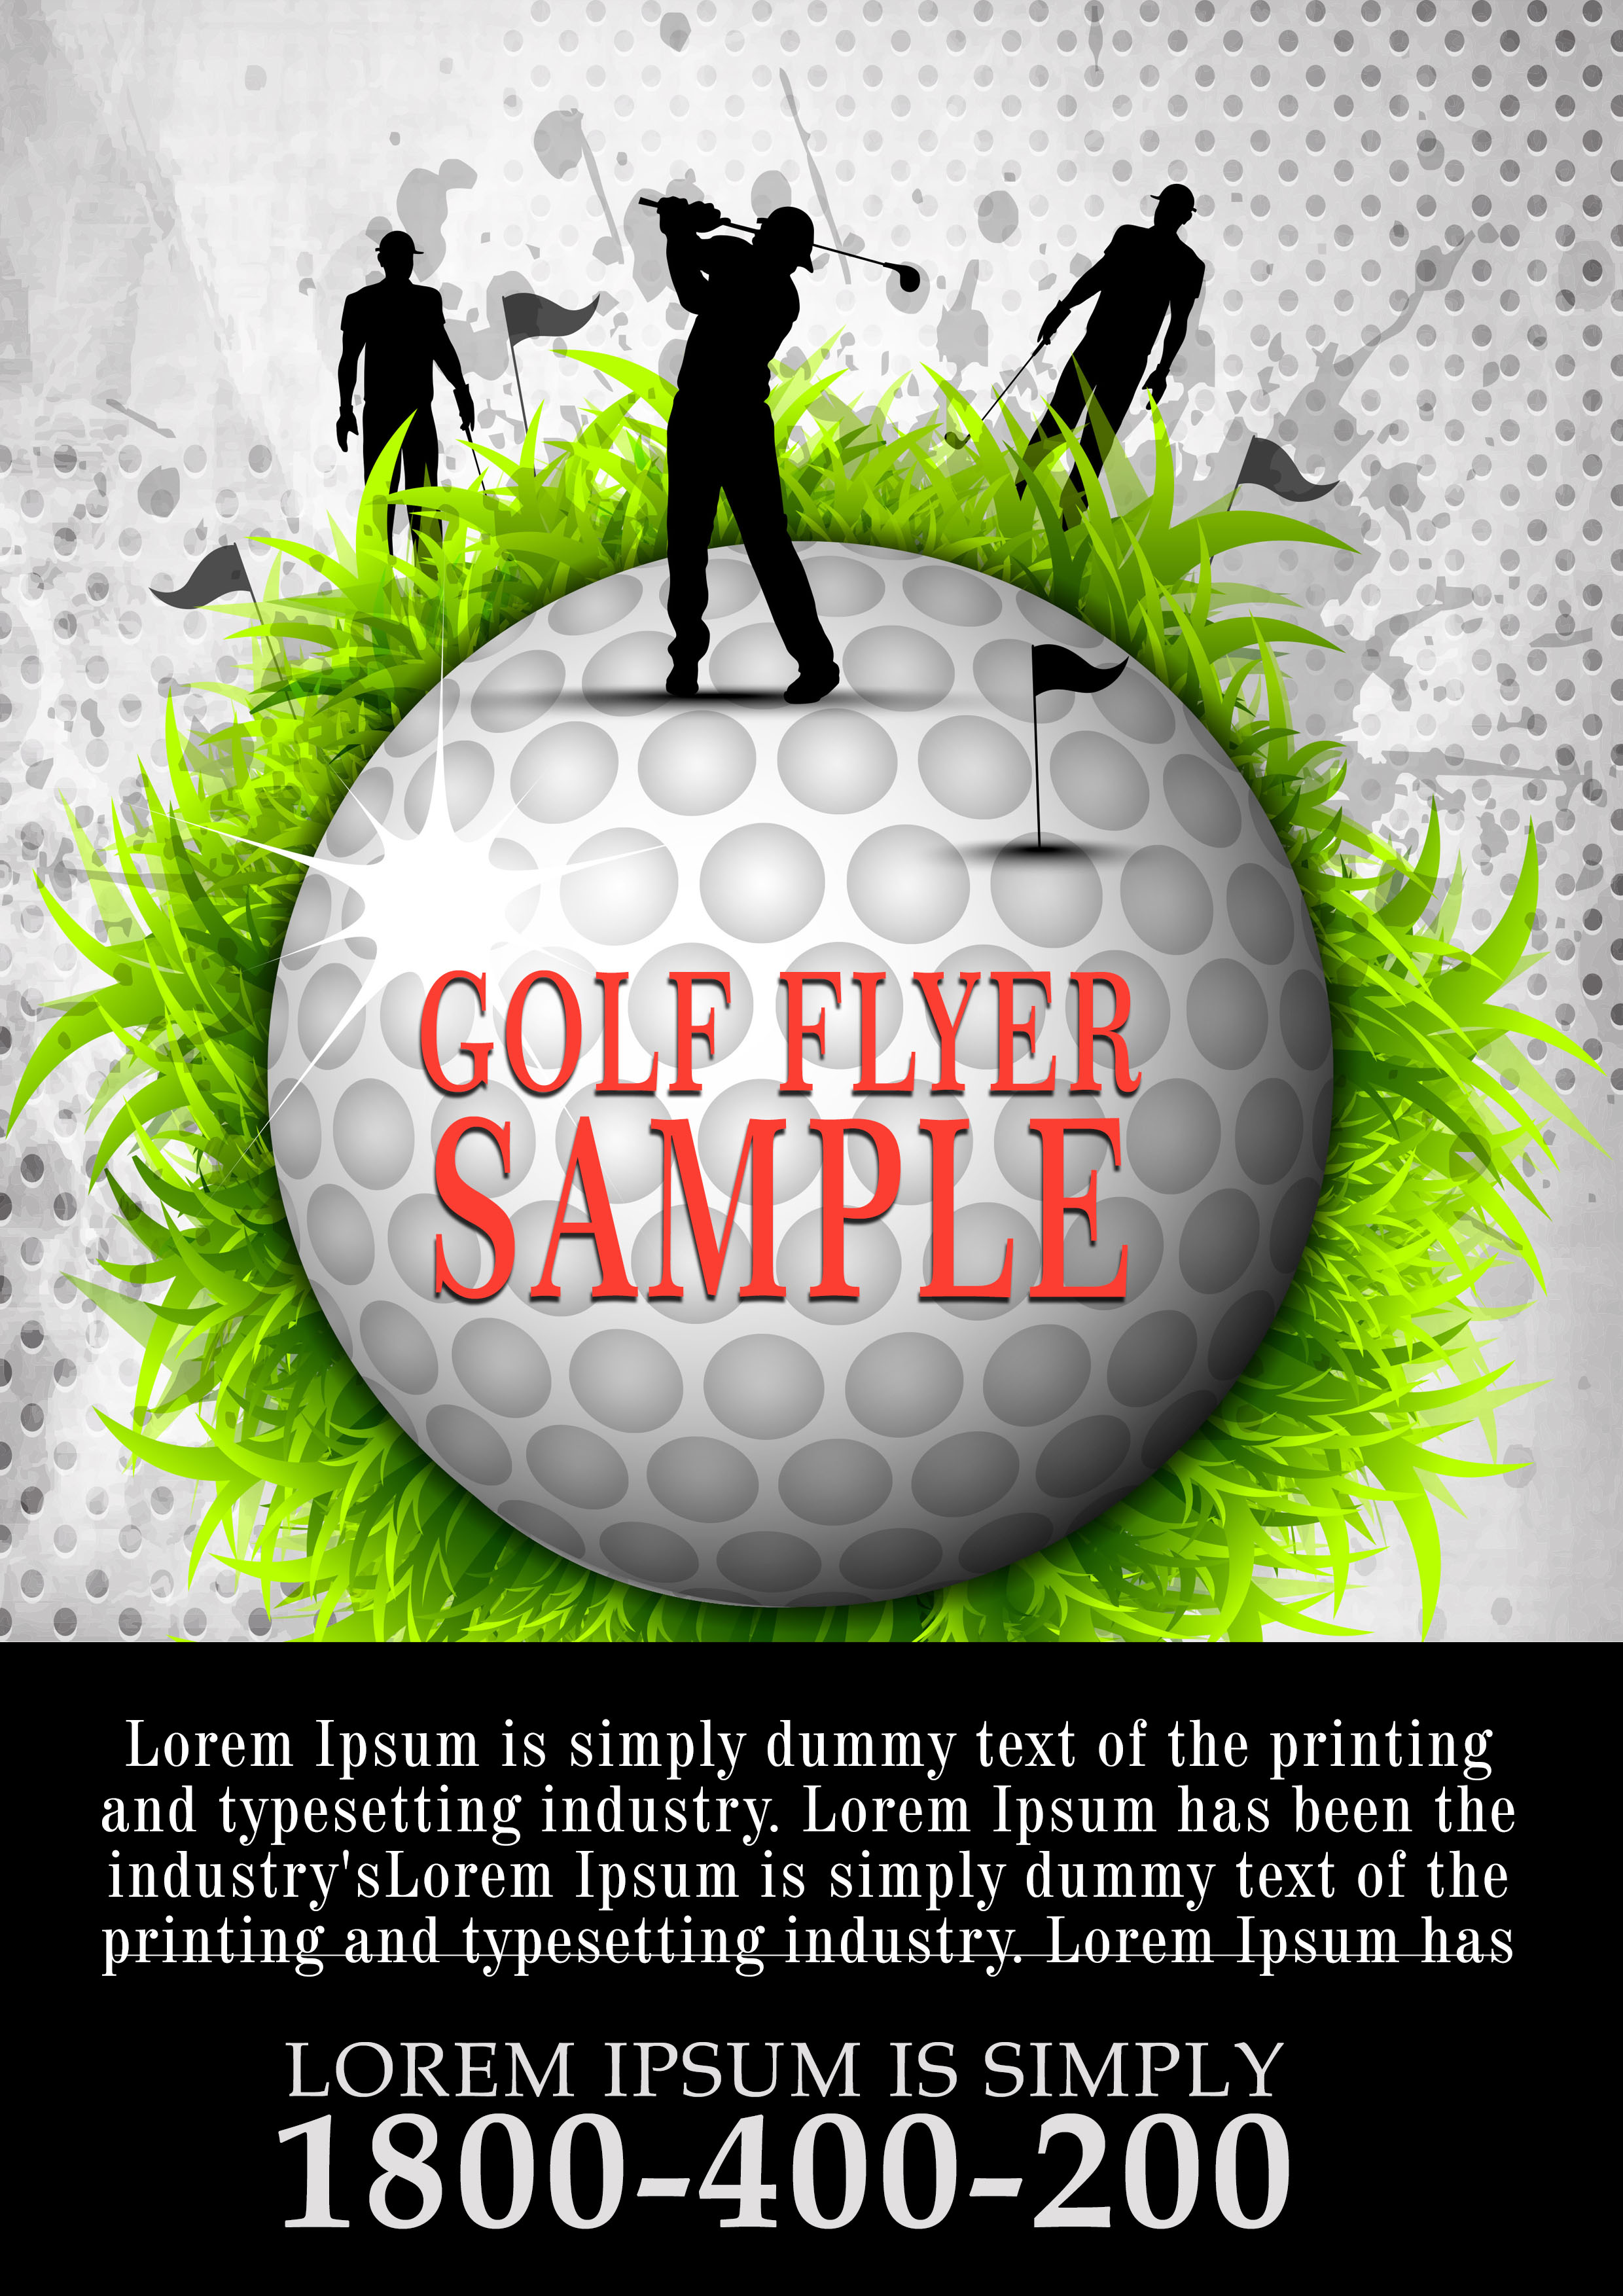 golf outing flyer template free   Manqal.hellenes.co